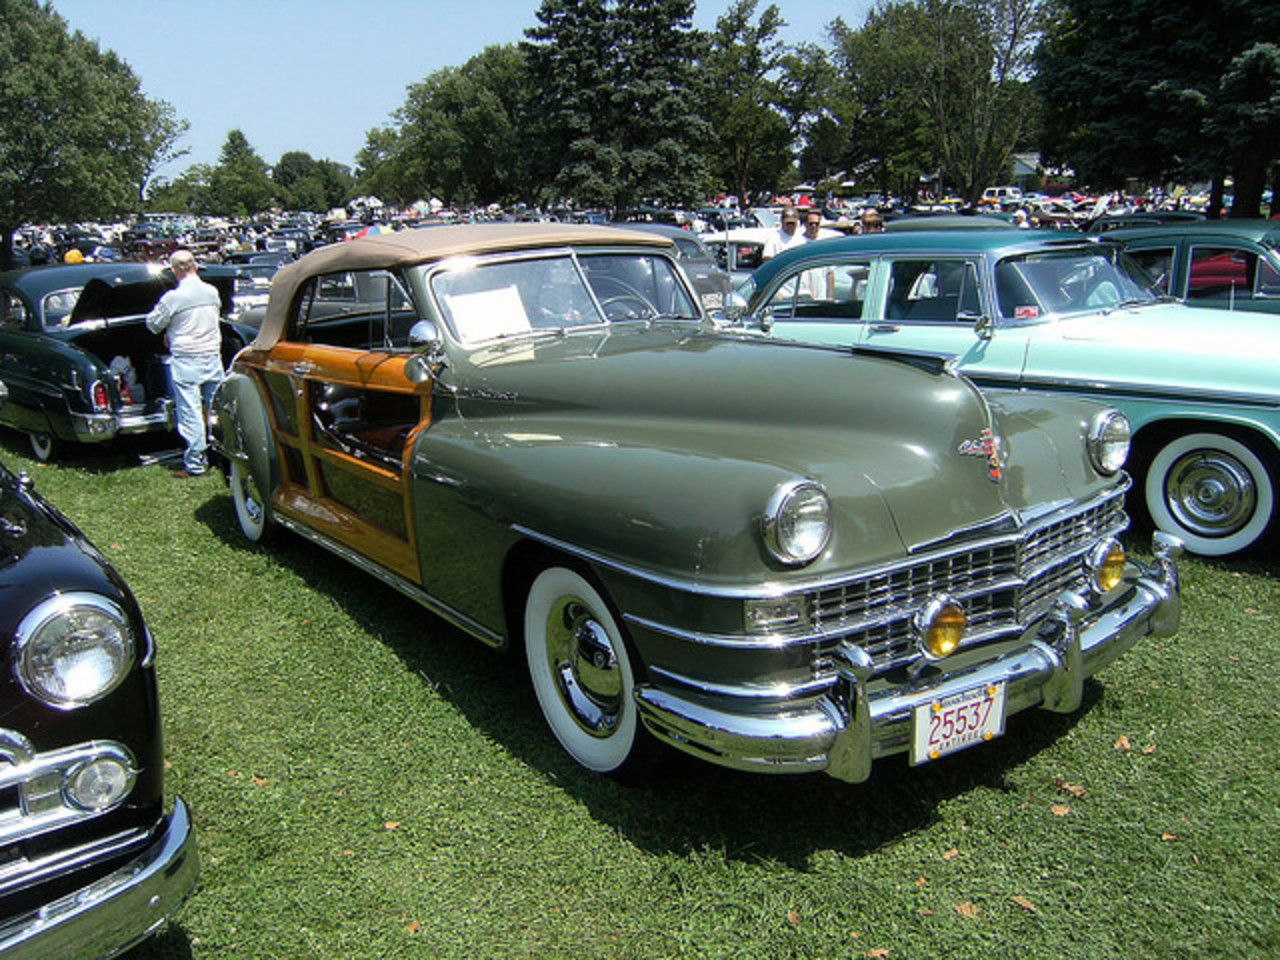 47 Chrysler Town and Country | Flickr - Photo Sharing!